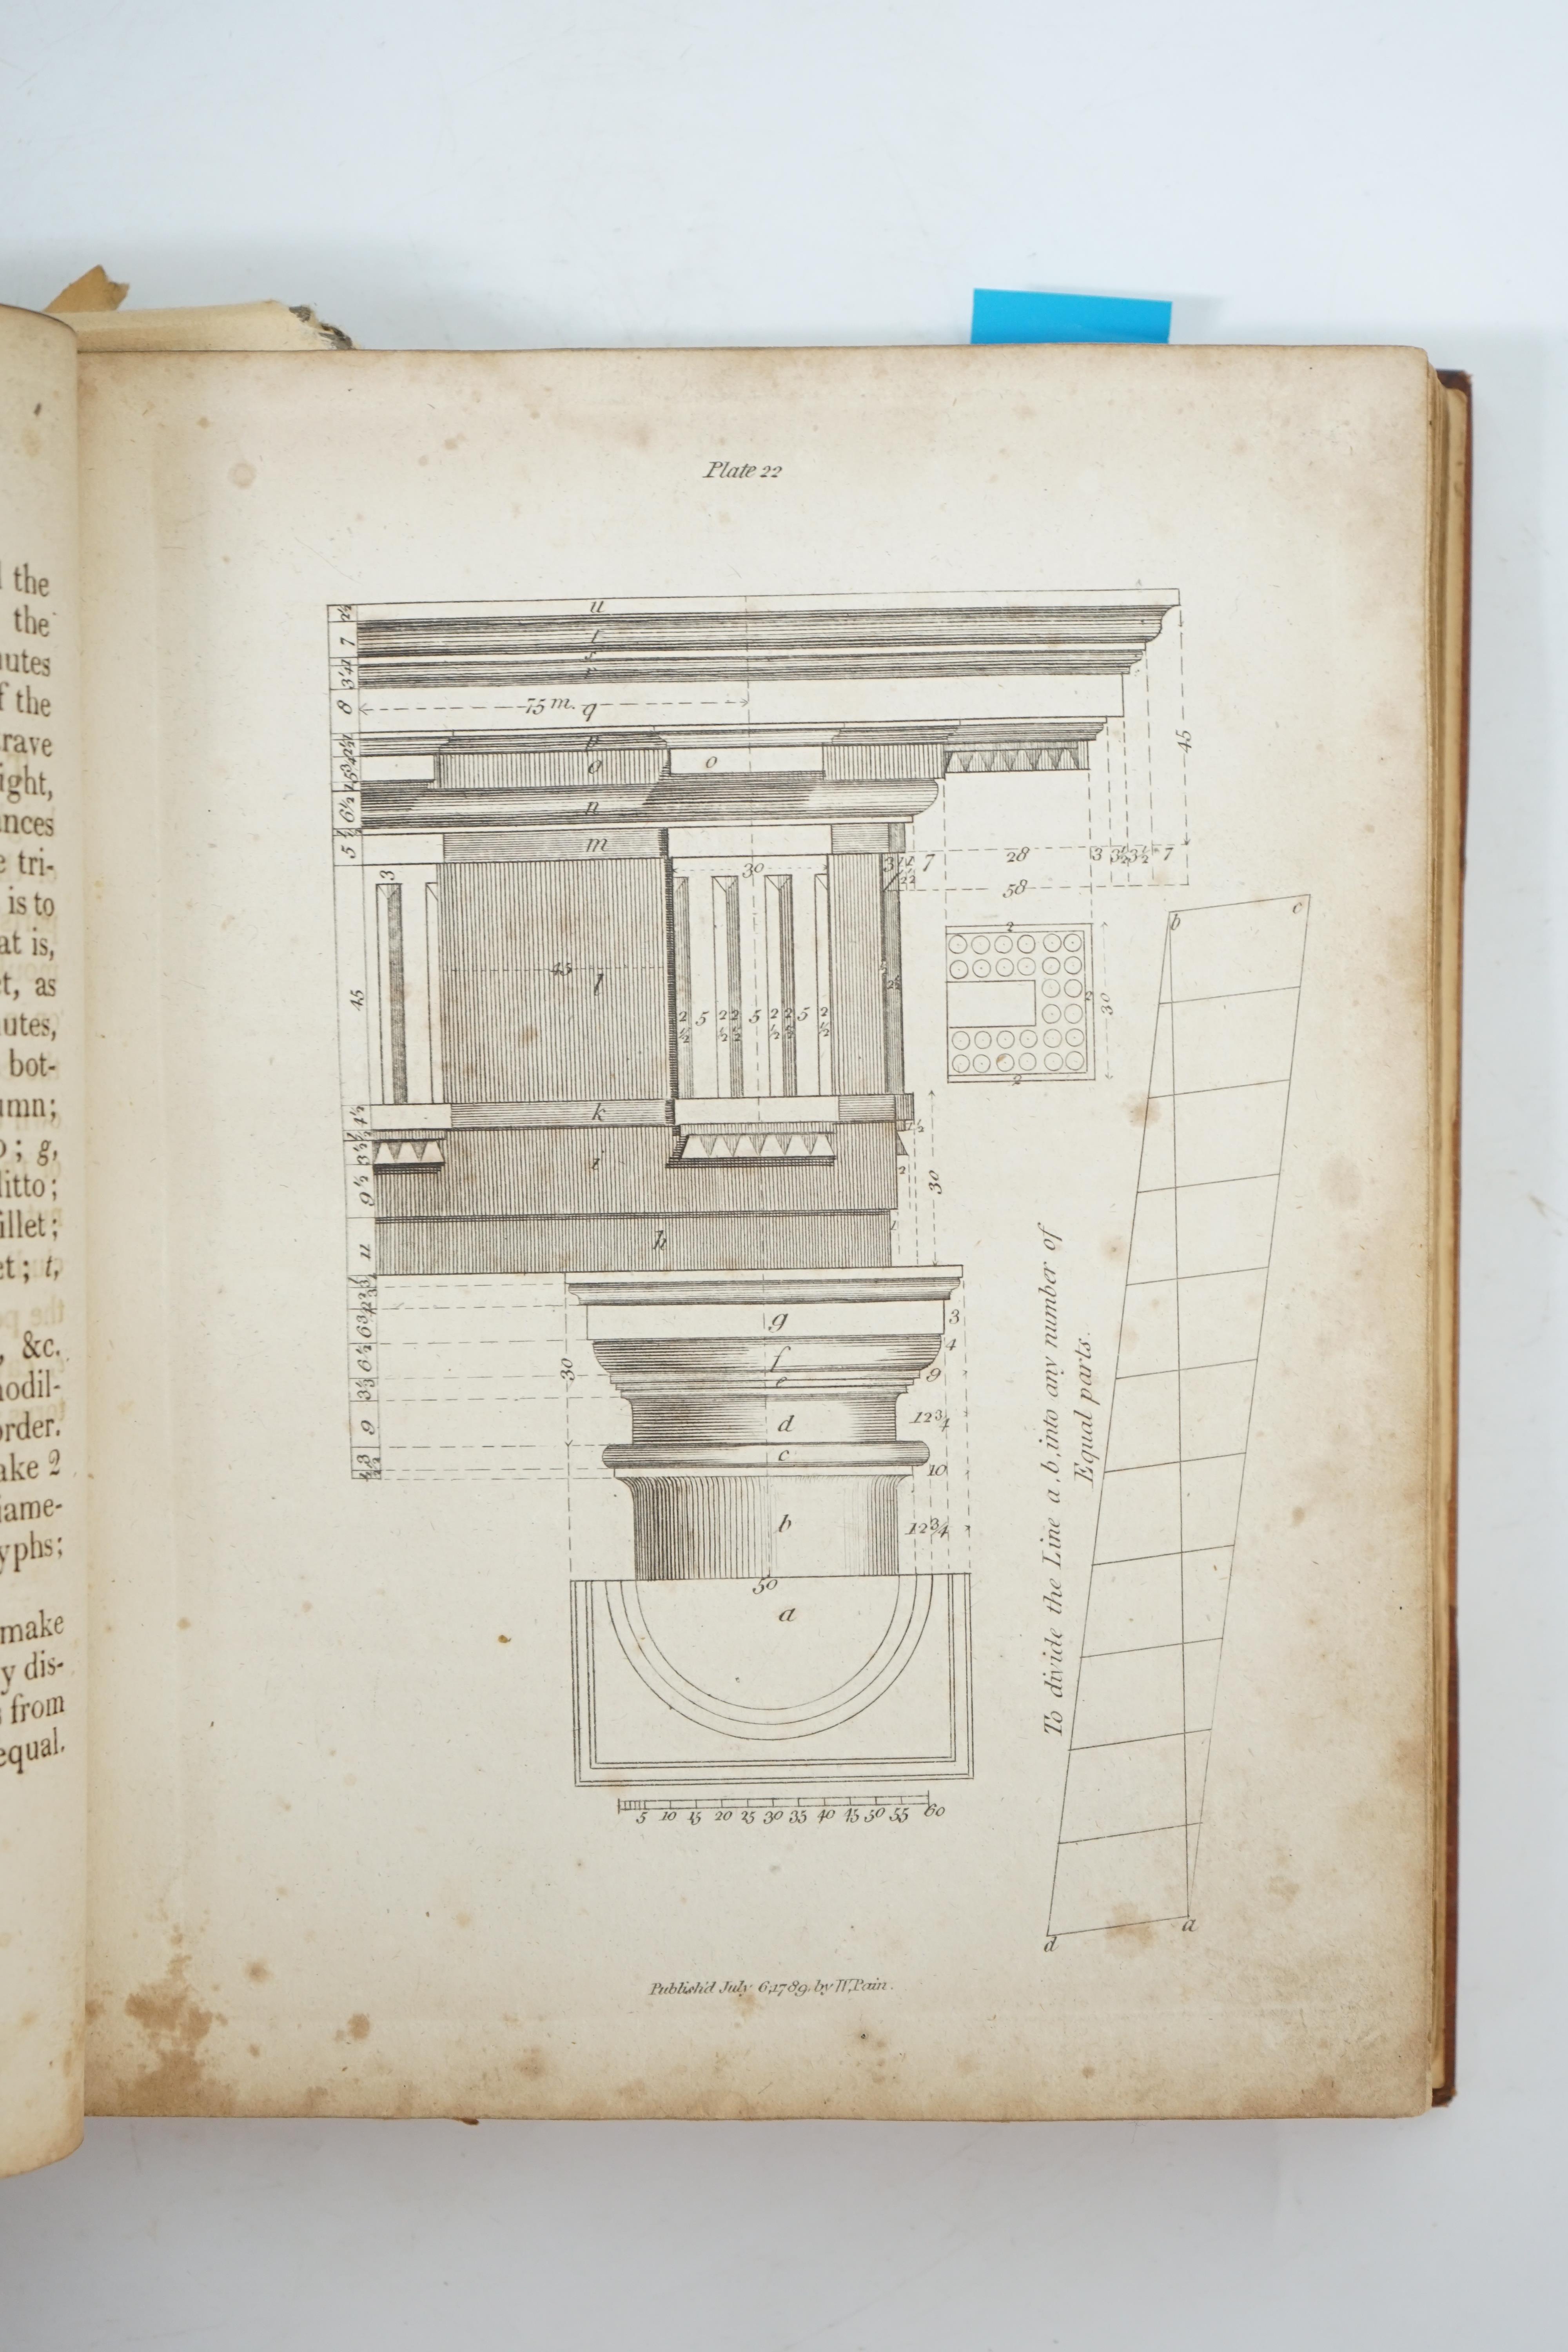 Pain, William - The Carpenter’s and Joiner’s Repository: or, A New System of Lines and Proportions for Doors, Windows, Chimnies…for finishing of rooms, with 2 engraved frontispieces, the first with library stamp verso, 6